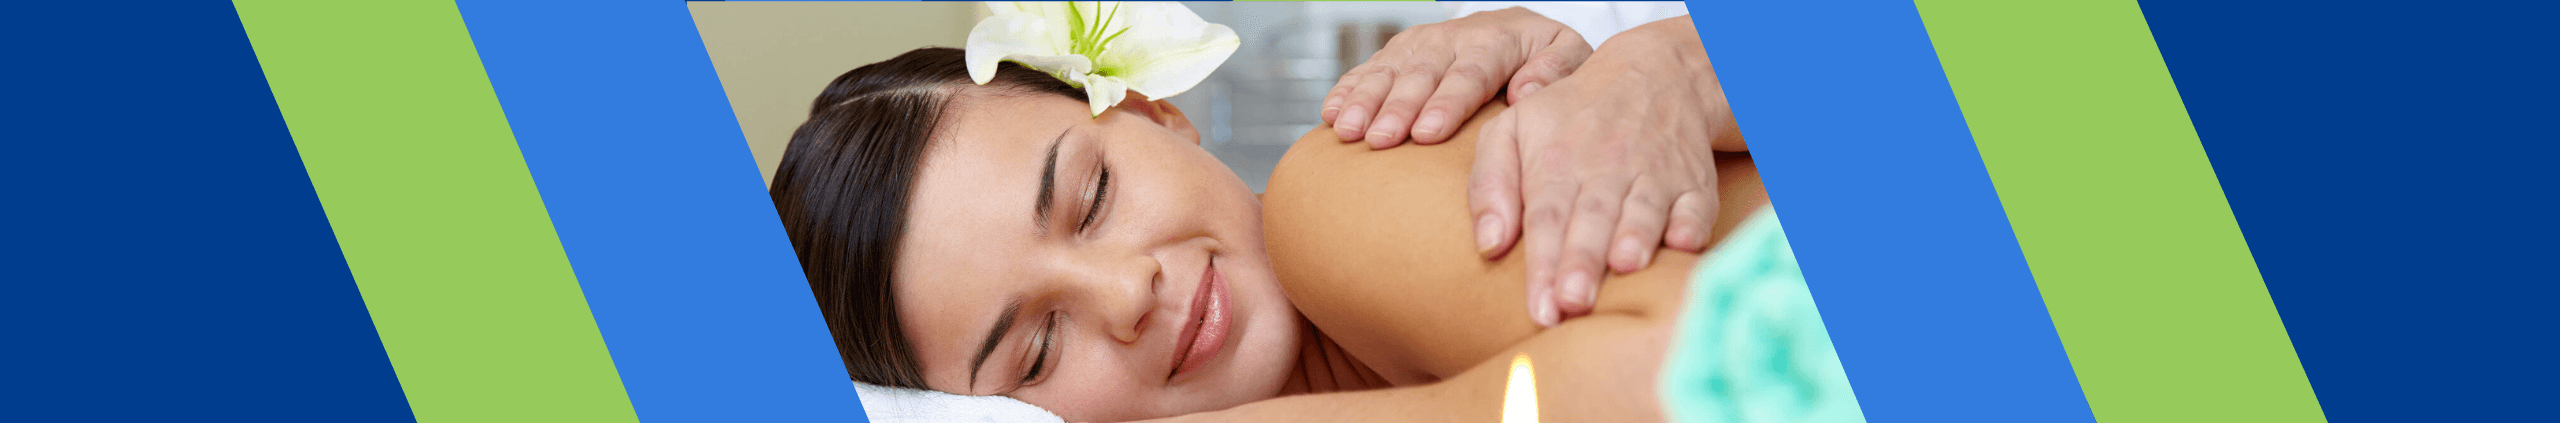 Banner image with colored striped shapes on the sides and an image of a person getting a massage in the middle